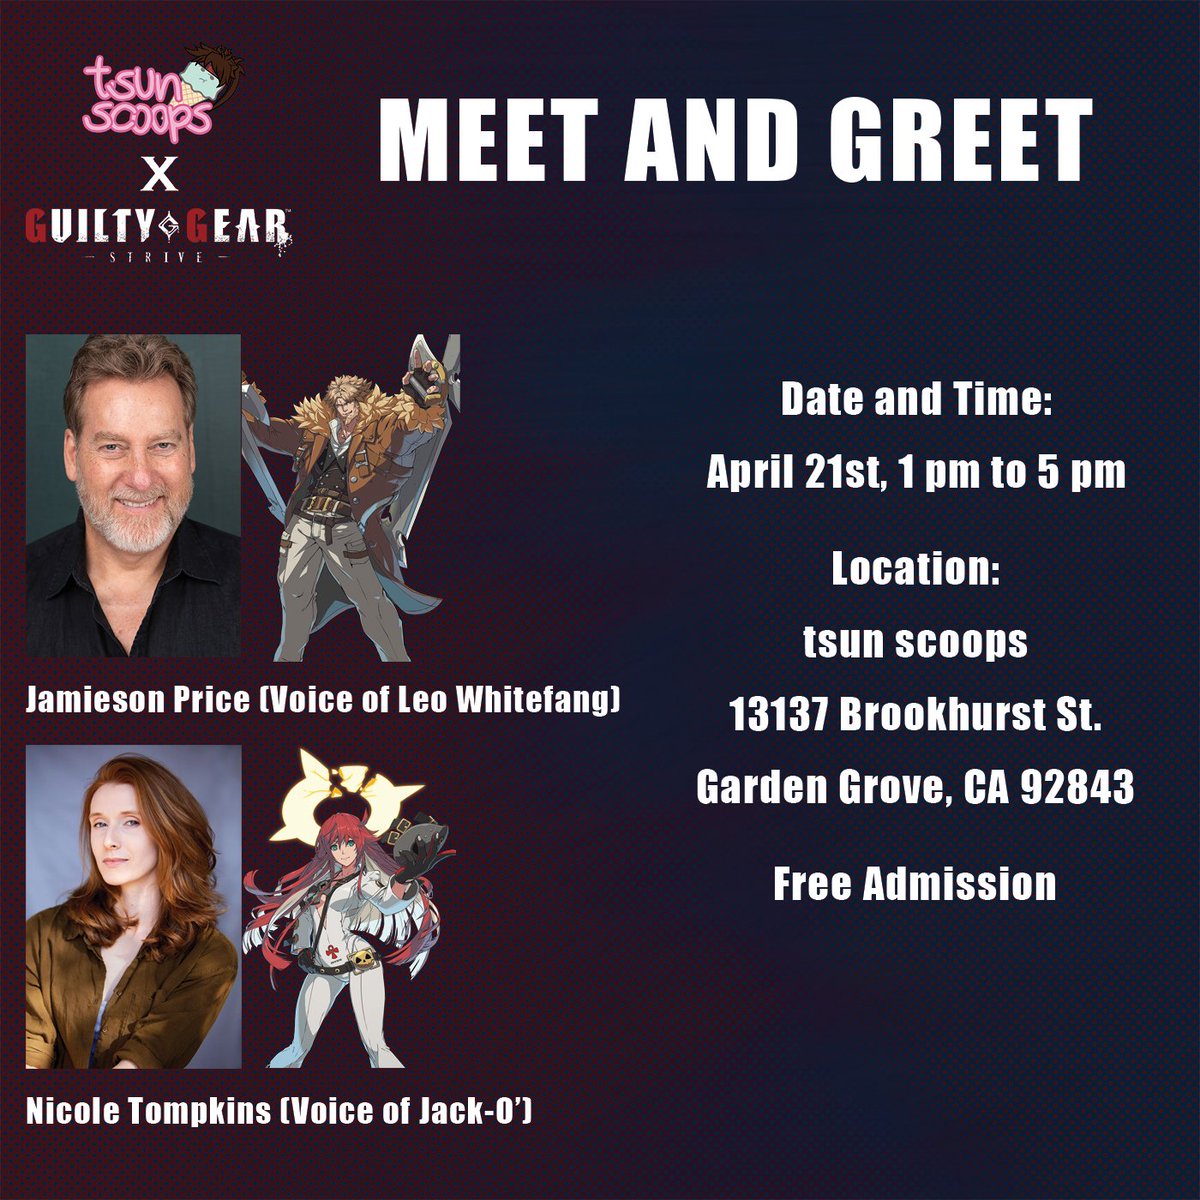 We've got two amazing daredevils stopping by for the grand finale of our Guilty Gear collaboration! @NikiLeeTompkins (voice of Jack-O') and @JamiesonPrice (voice of Leo Whitefang) will be doing a meet and greet at our shop! We'll have some goodies as well for the last day!